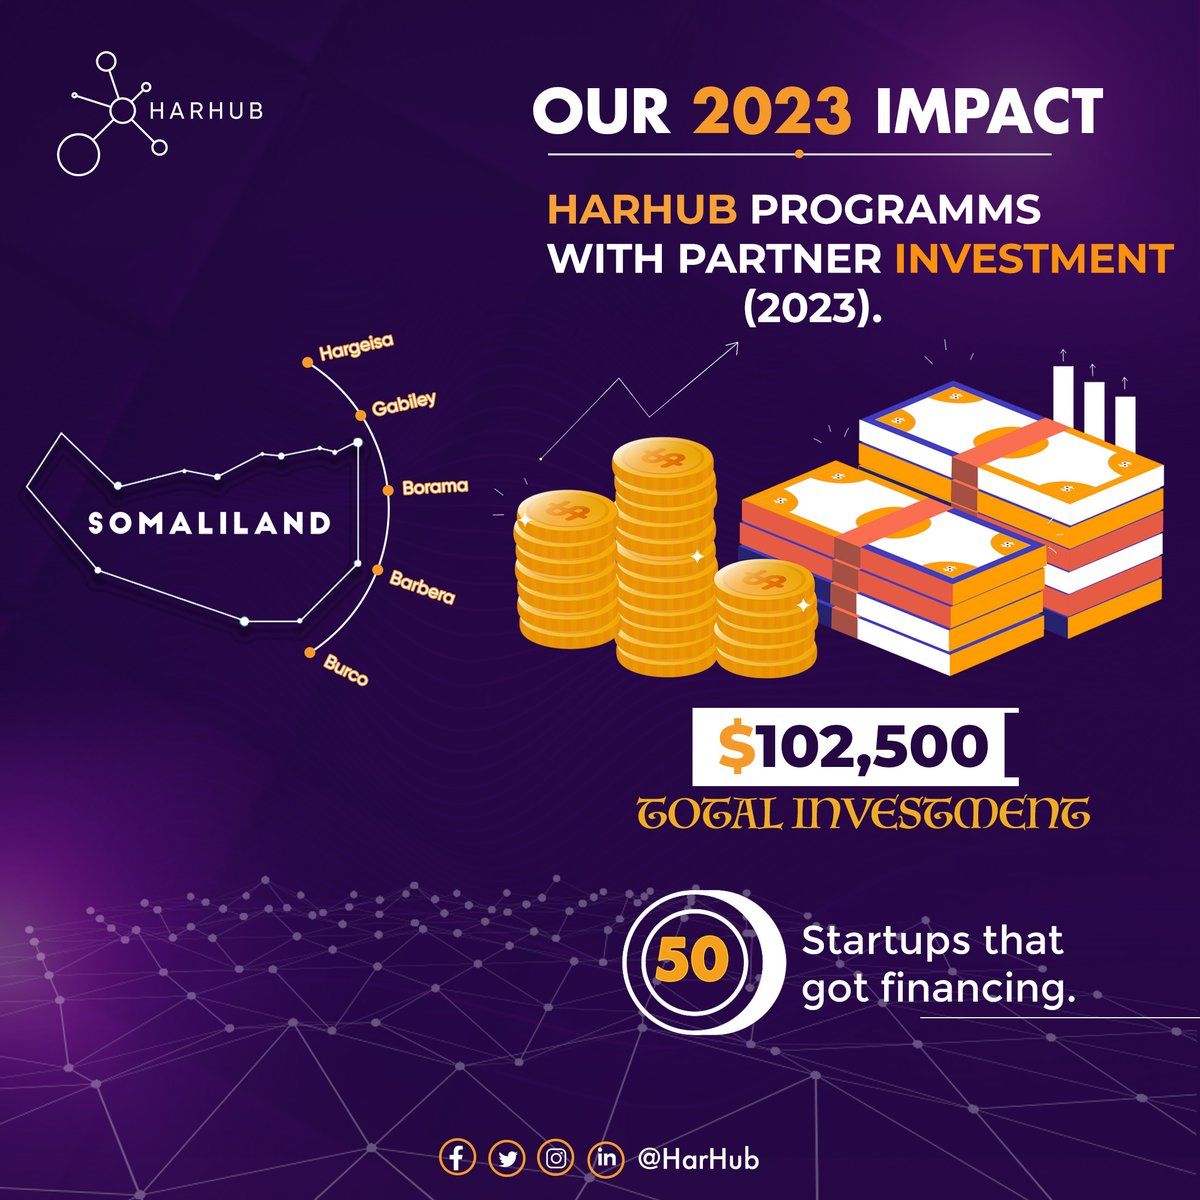 In 2023, we invested $102,500 thousand dollars to support 50 young entrepreneurs from various regions across the country. Our programs focused on selecting innovative projects that address societal challenges. Through meticulous interviews and comprehensive training.
#Impact2023